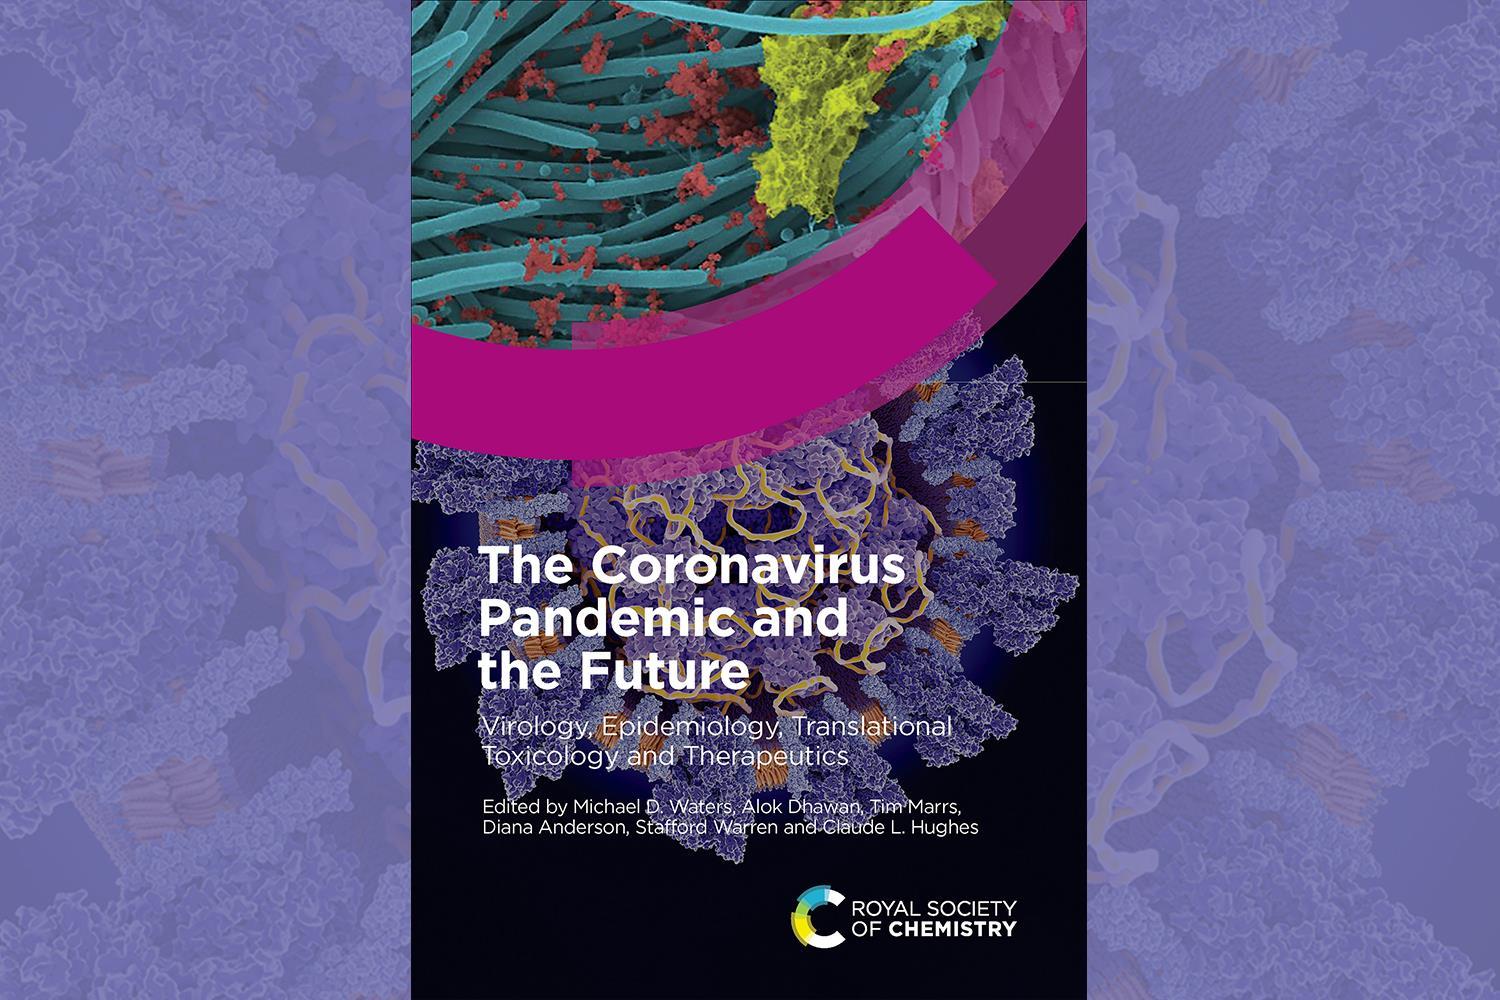 Infection and pathogenesis of SARS-CoV2: an immunological perspective |  Book | Chemistry World